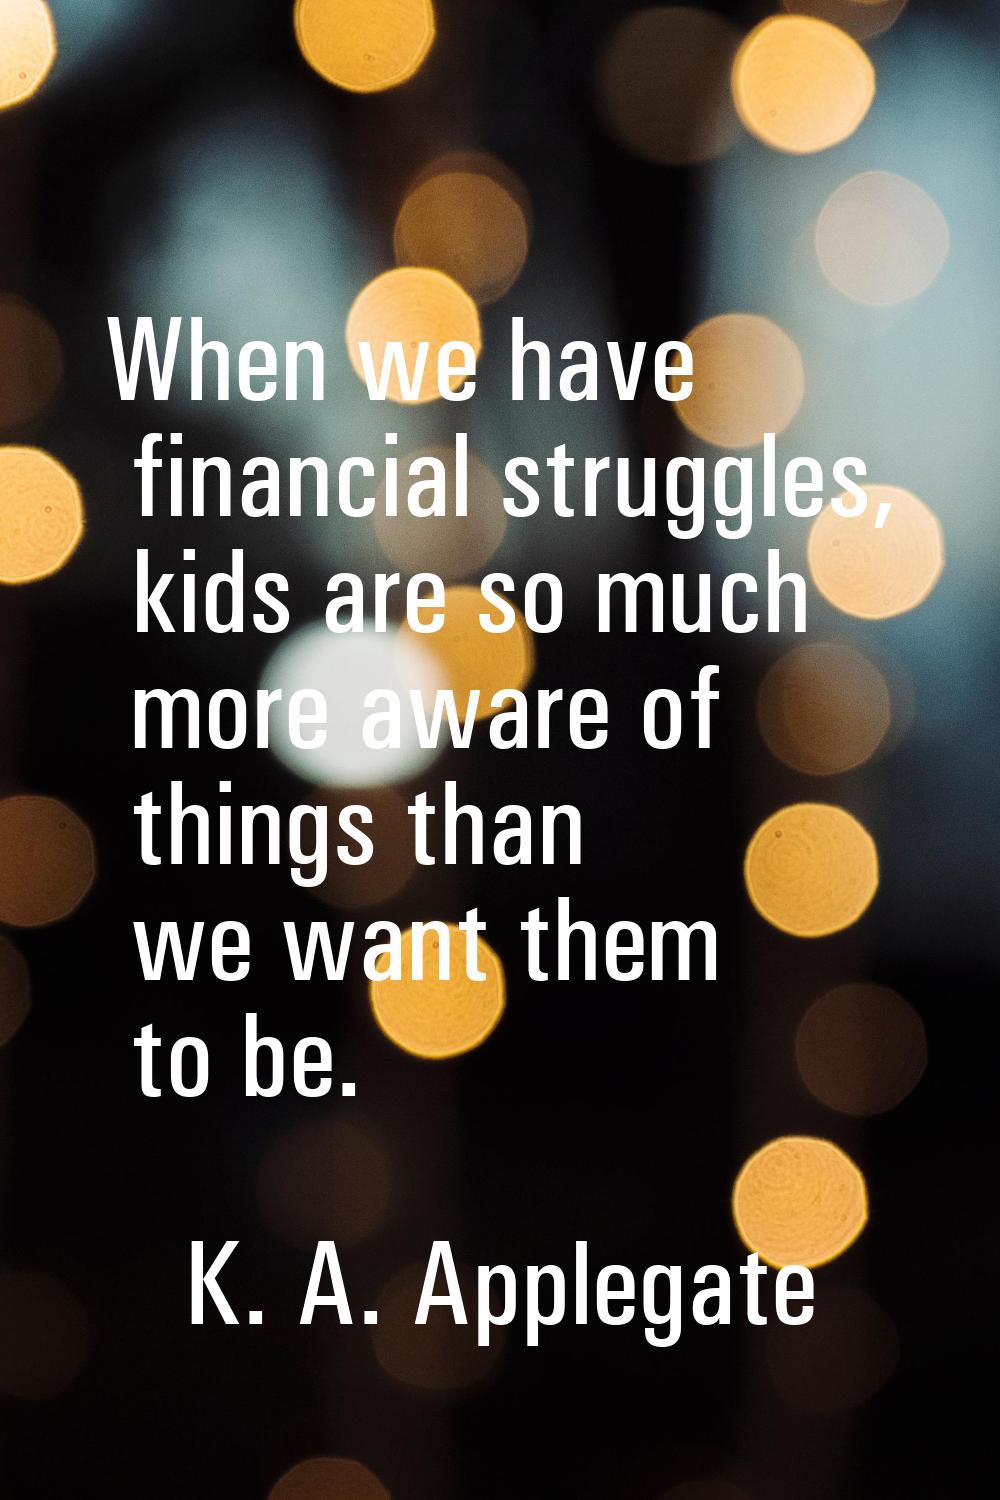 When we have financial struggles, kids are so much more aware of things than we want them to be.